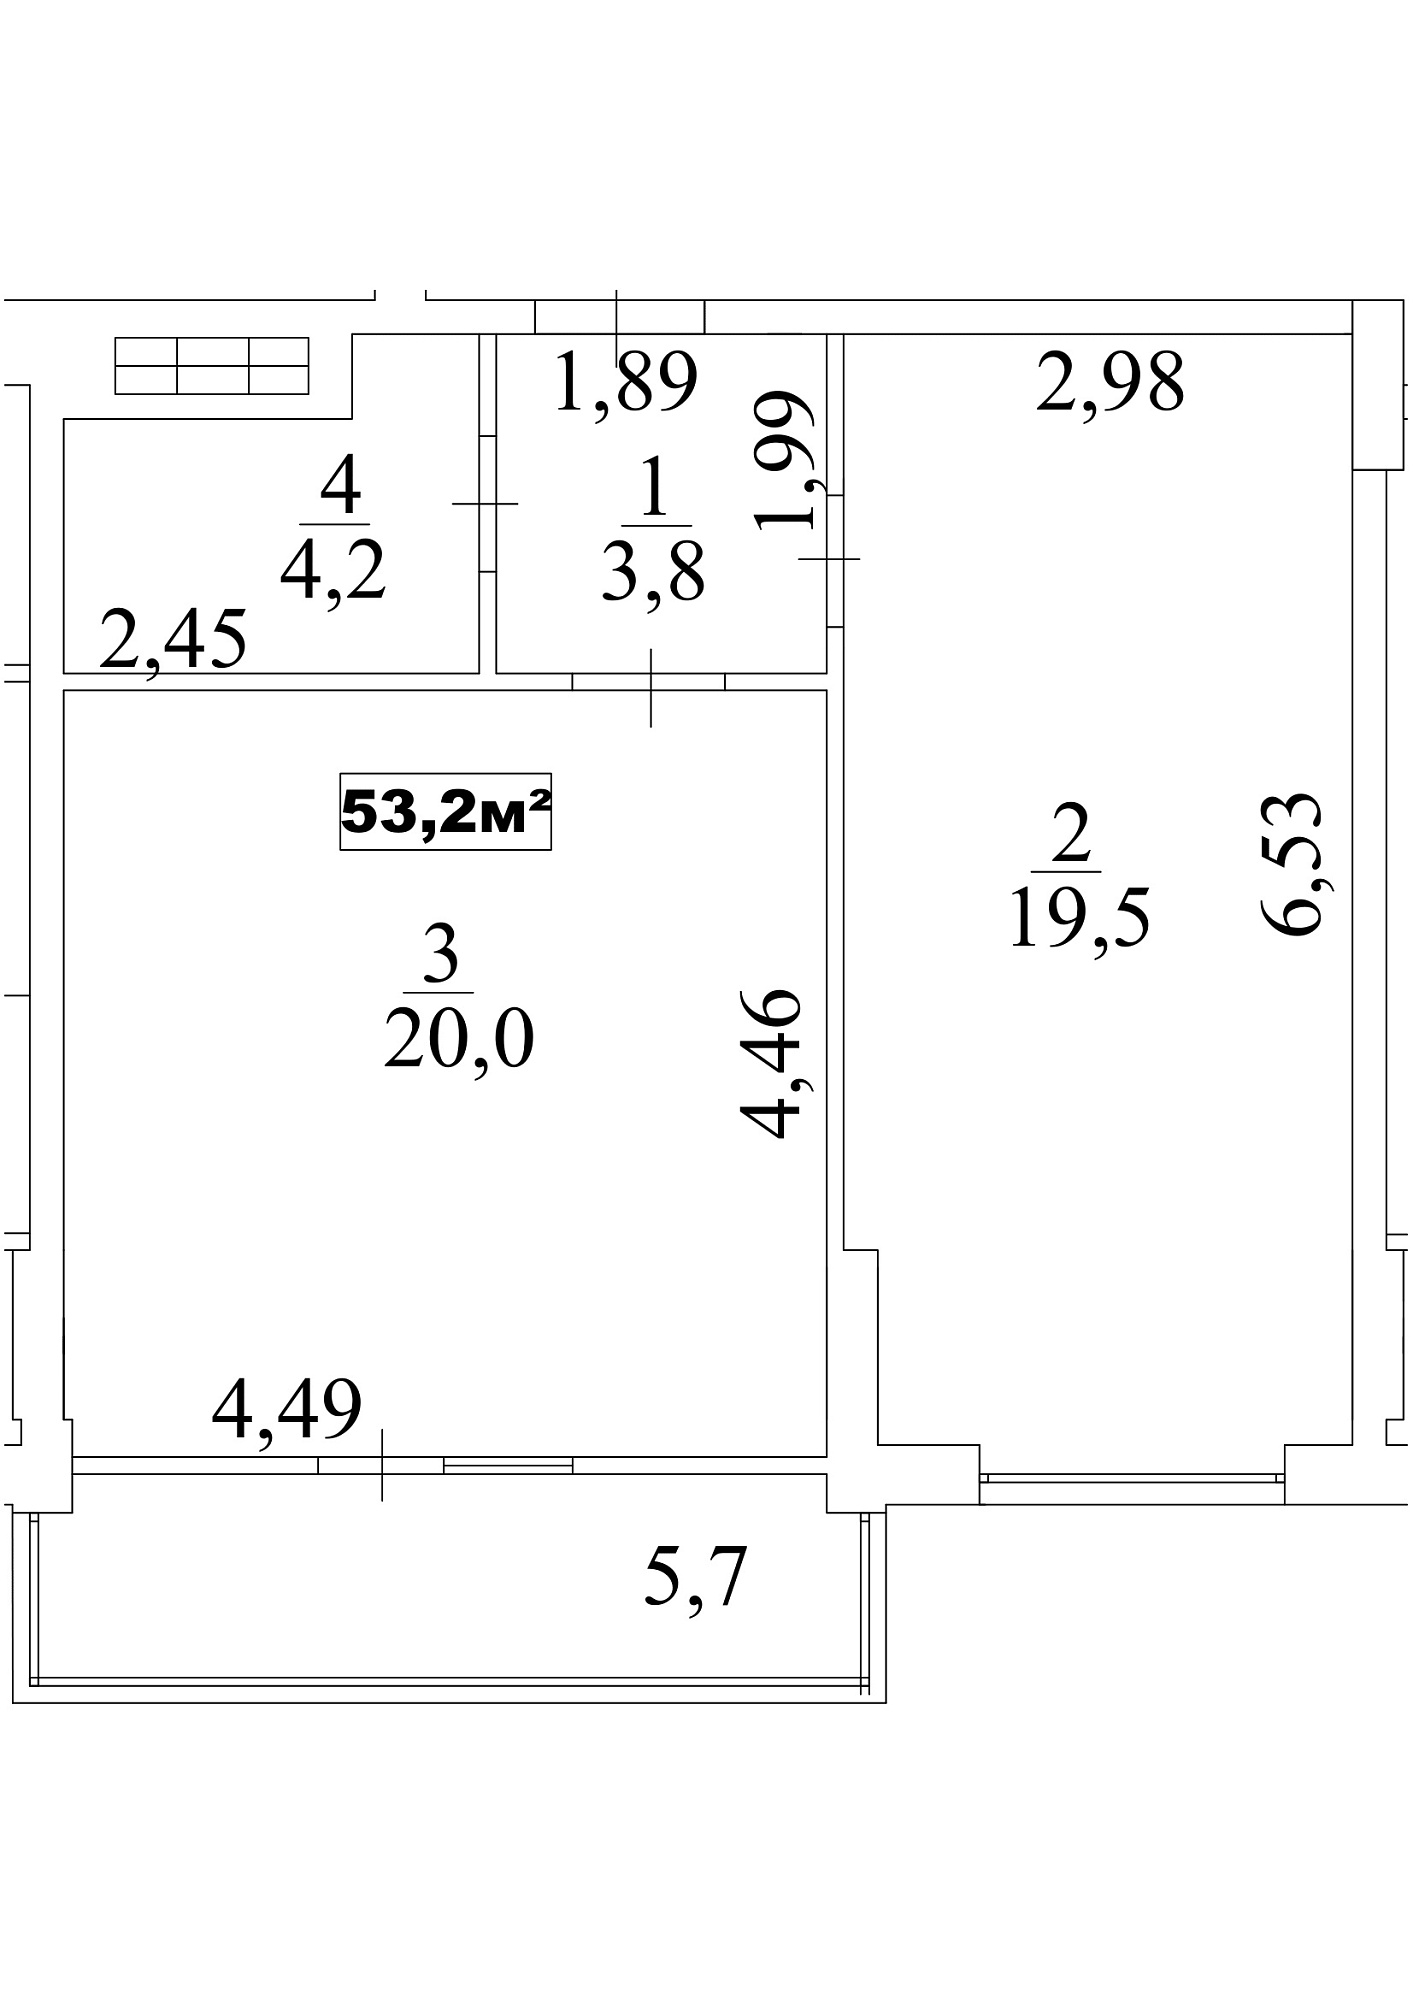 Planning 1-rm flats area 53.2m2, AB-10-09/00080.